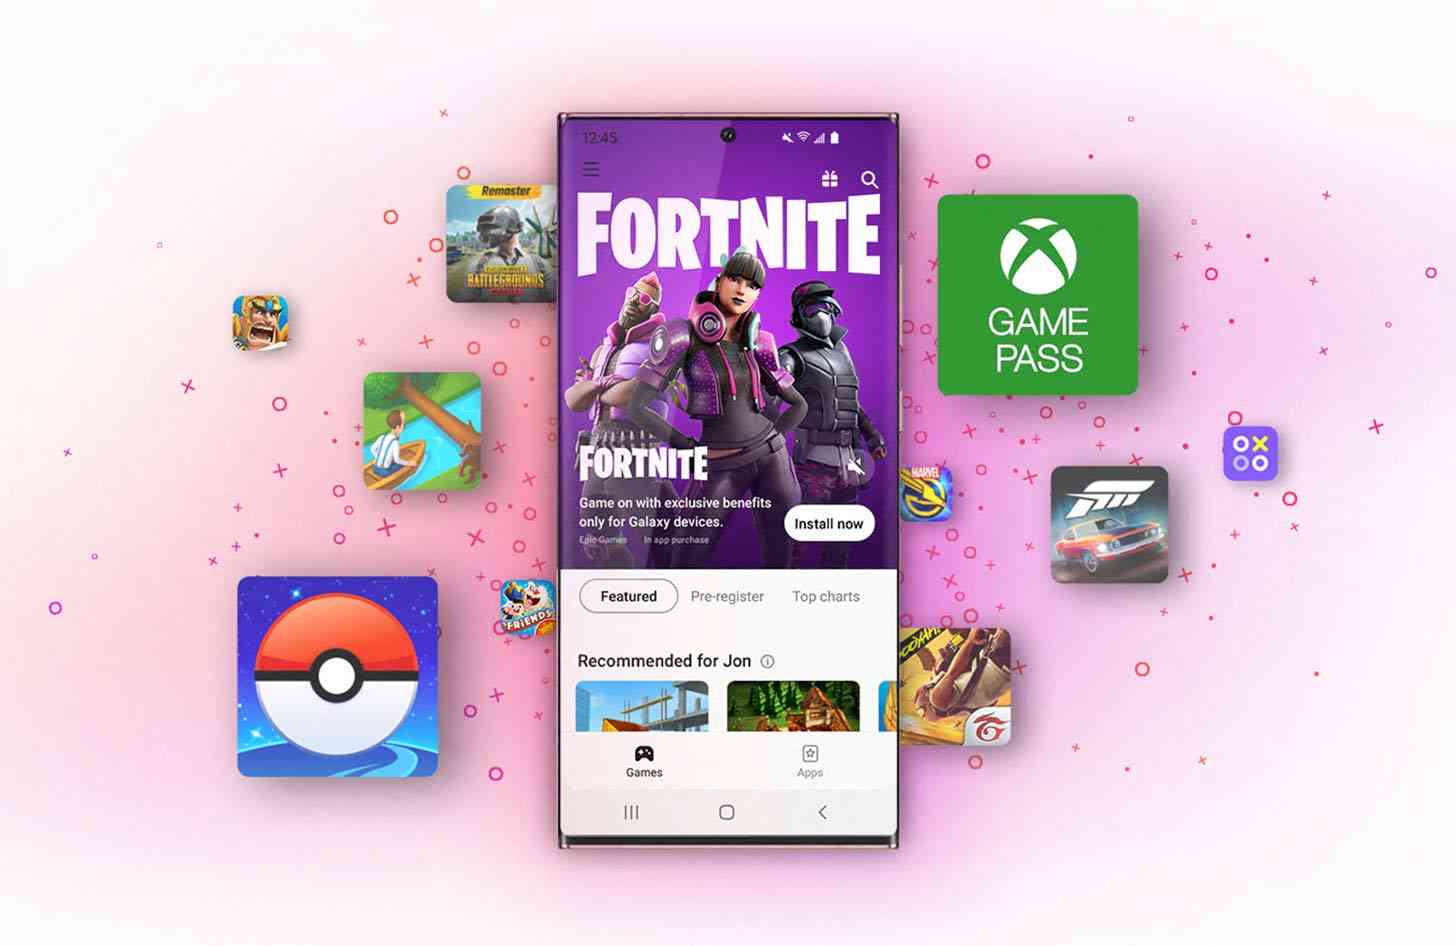 Fortnite Galaxy Store Payment Options Samsung Galaxy Store Gets Redesigned With A Focus On Fortnite And Gaming News Wirefly